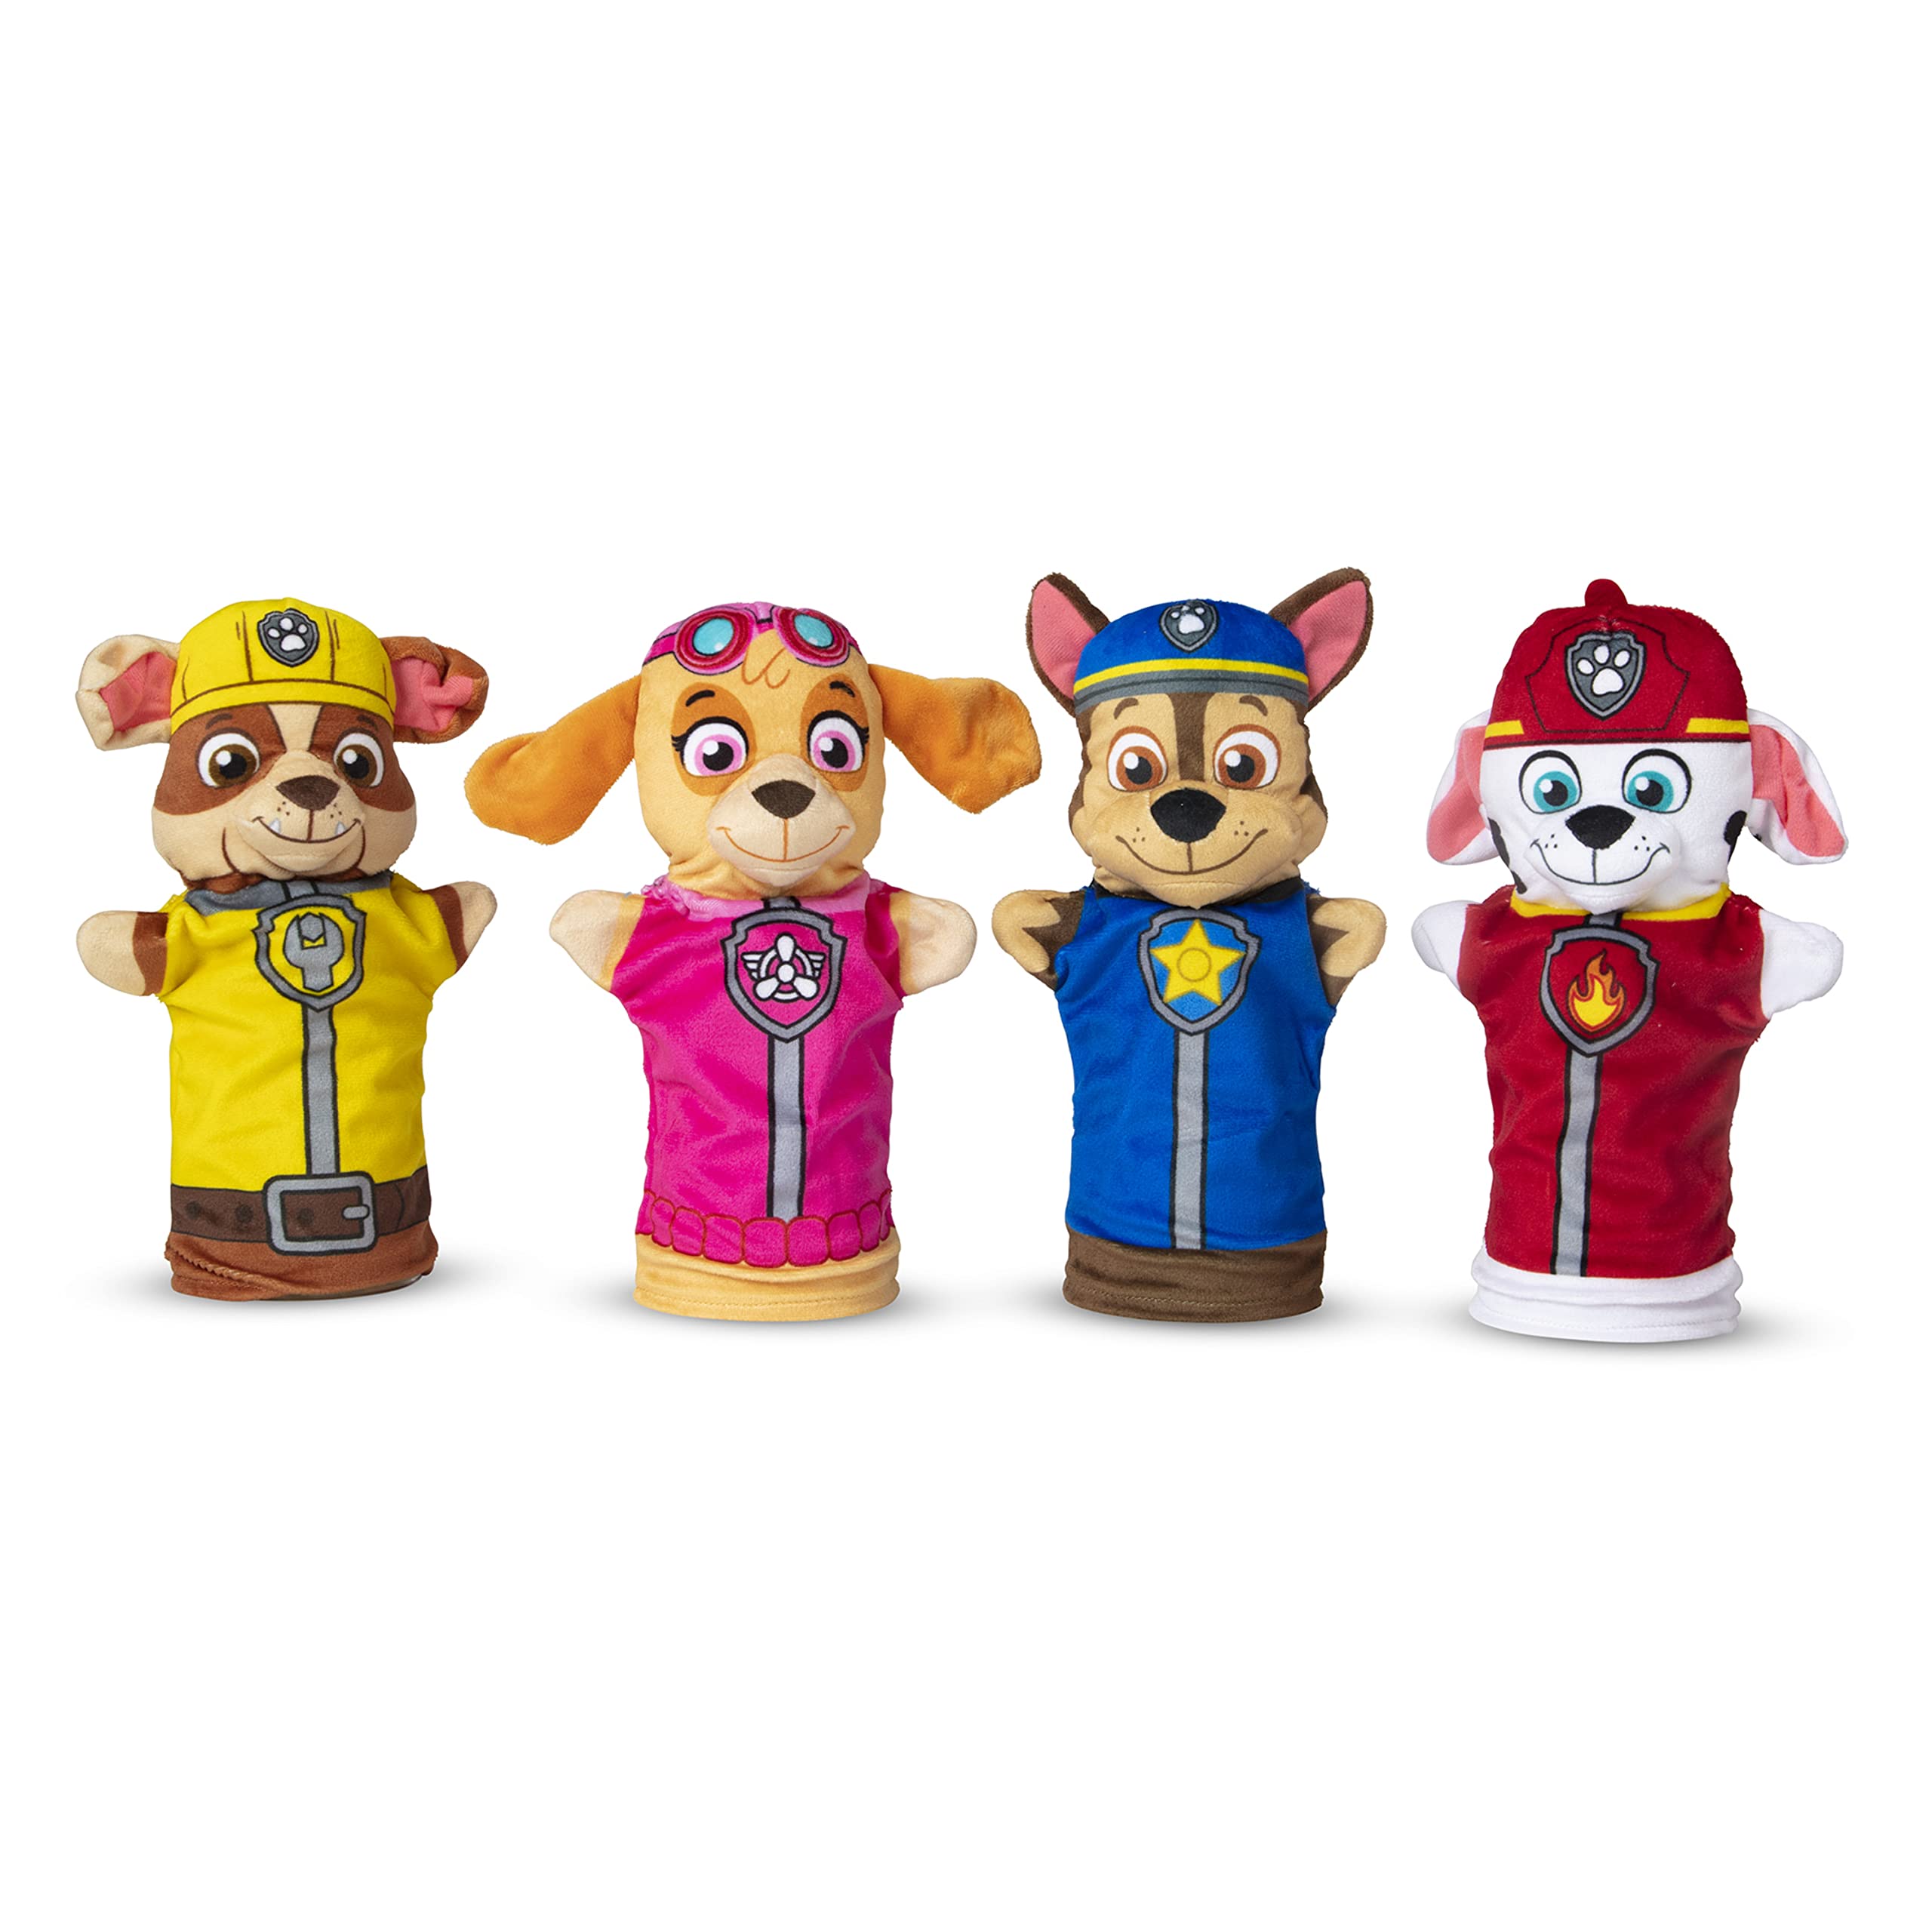 Melissa & Doug PAW Patrol Hand Puppets (4 Puppets, 4 Cards) - PAW Patrol Puppets Pretend Play for Kids